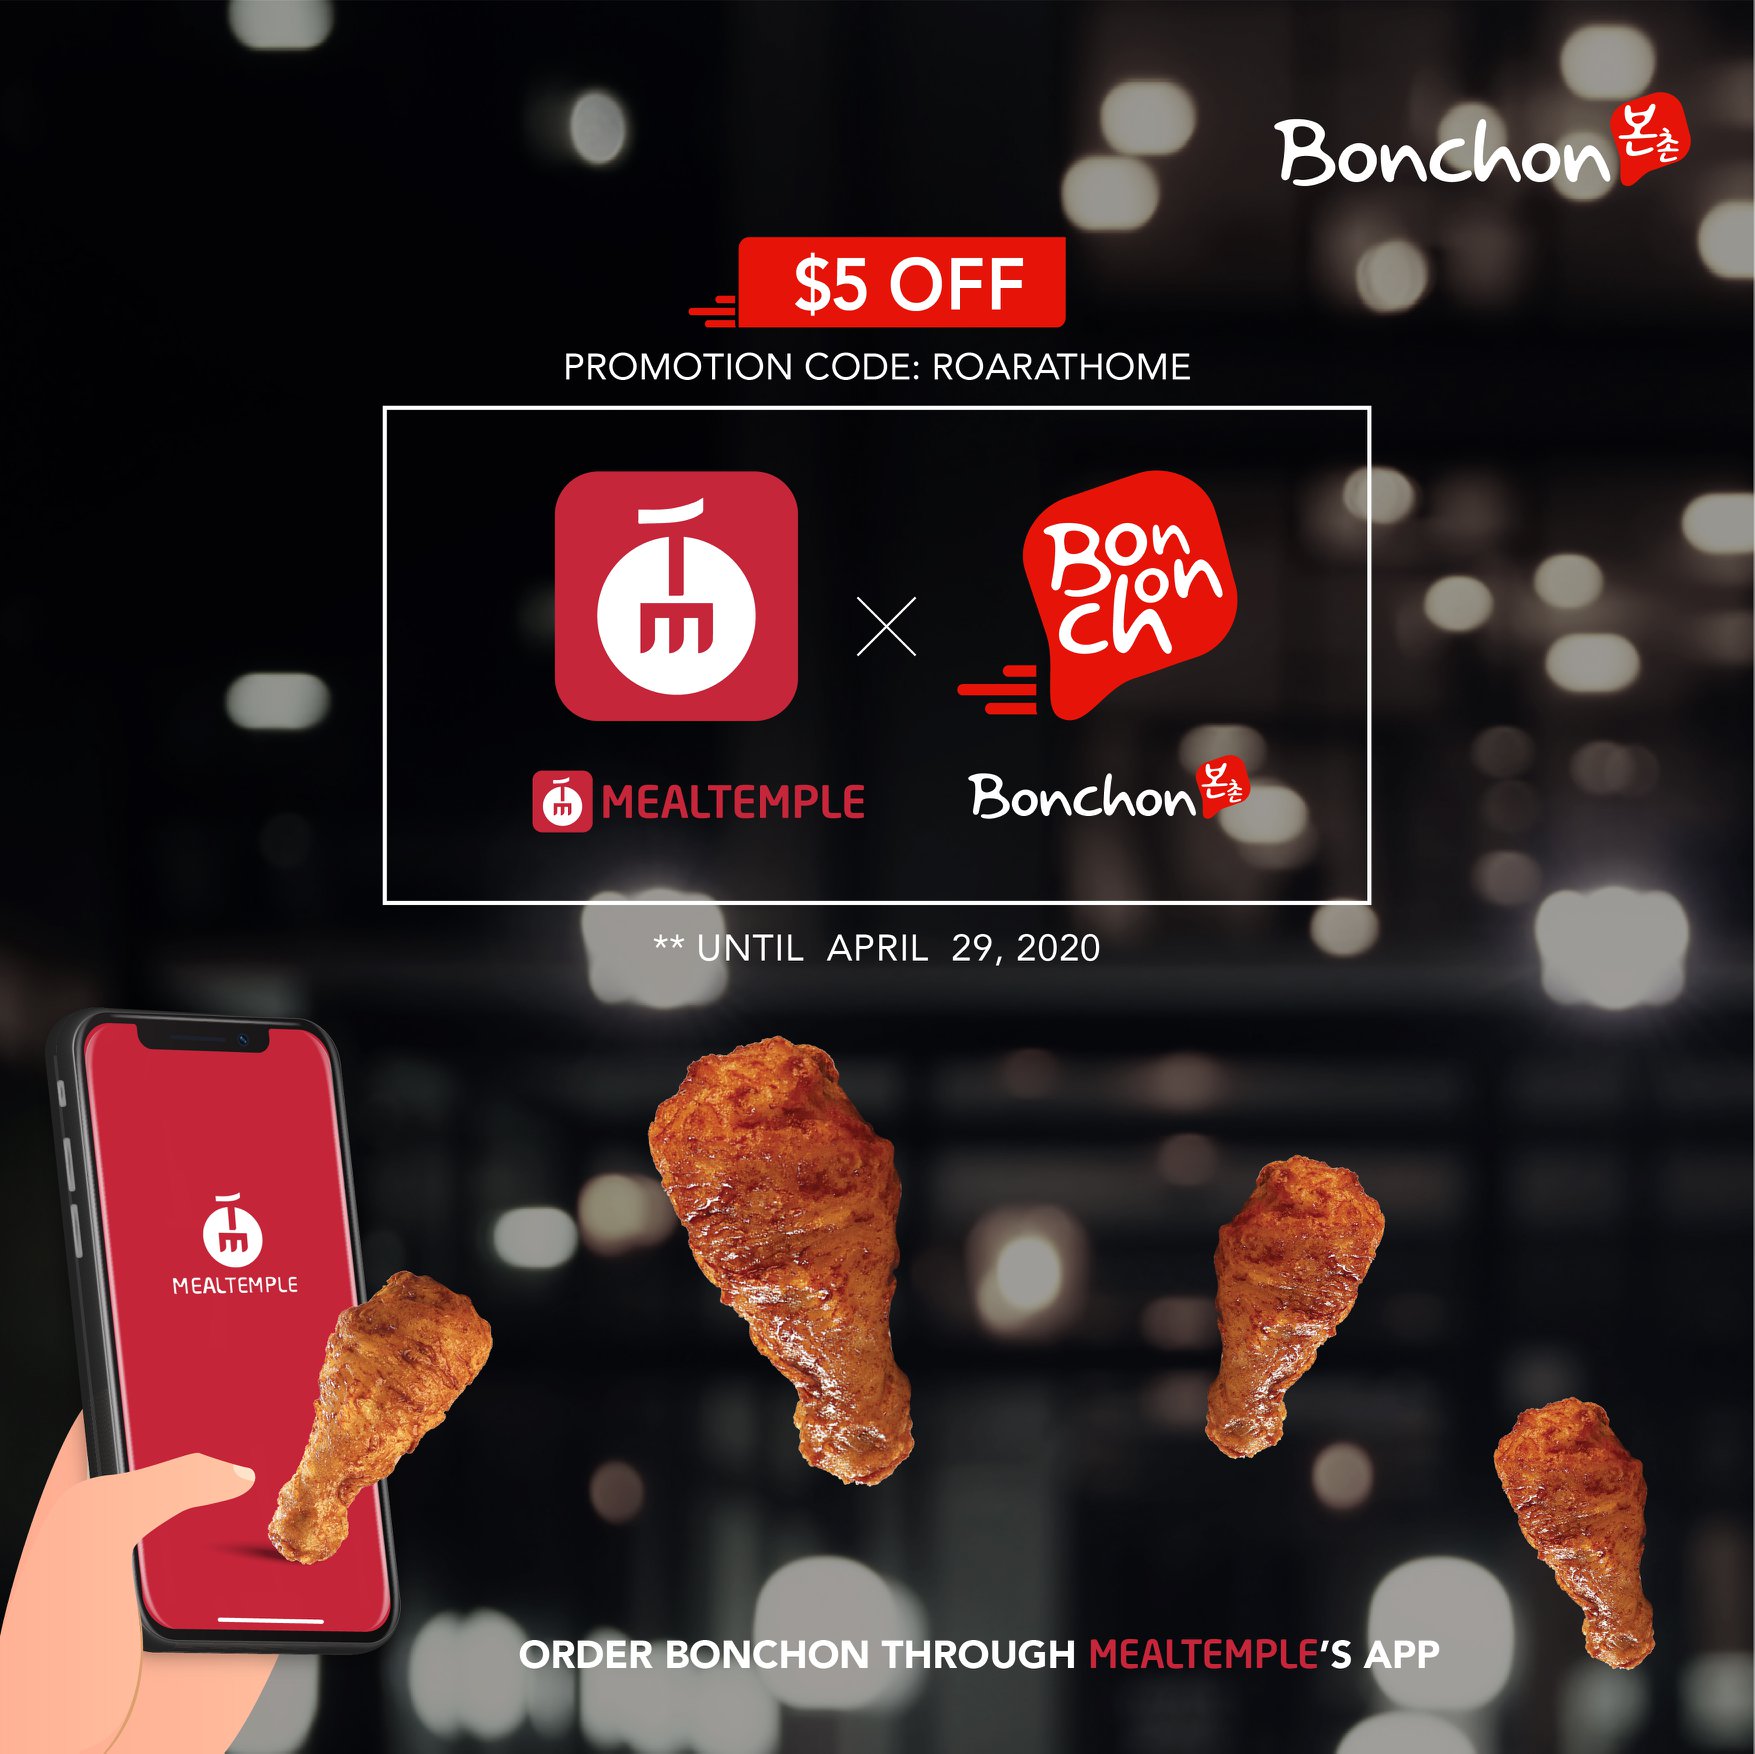 Get $5 OFF When You Order Bonchon Via Meal Temple